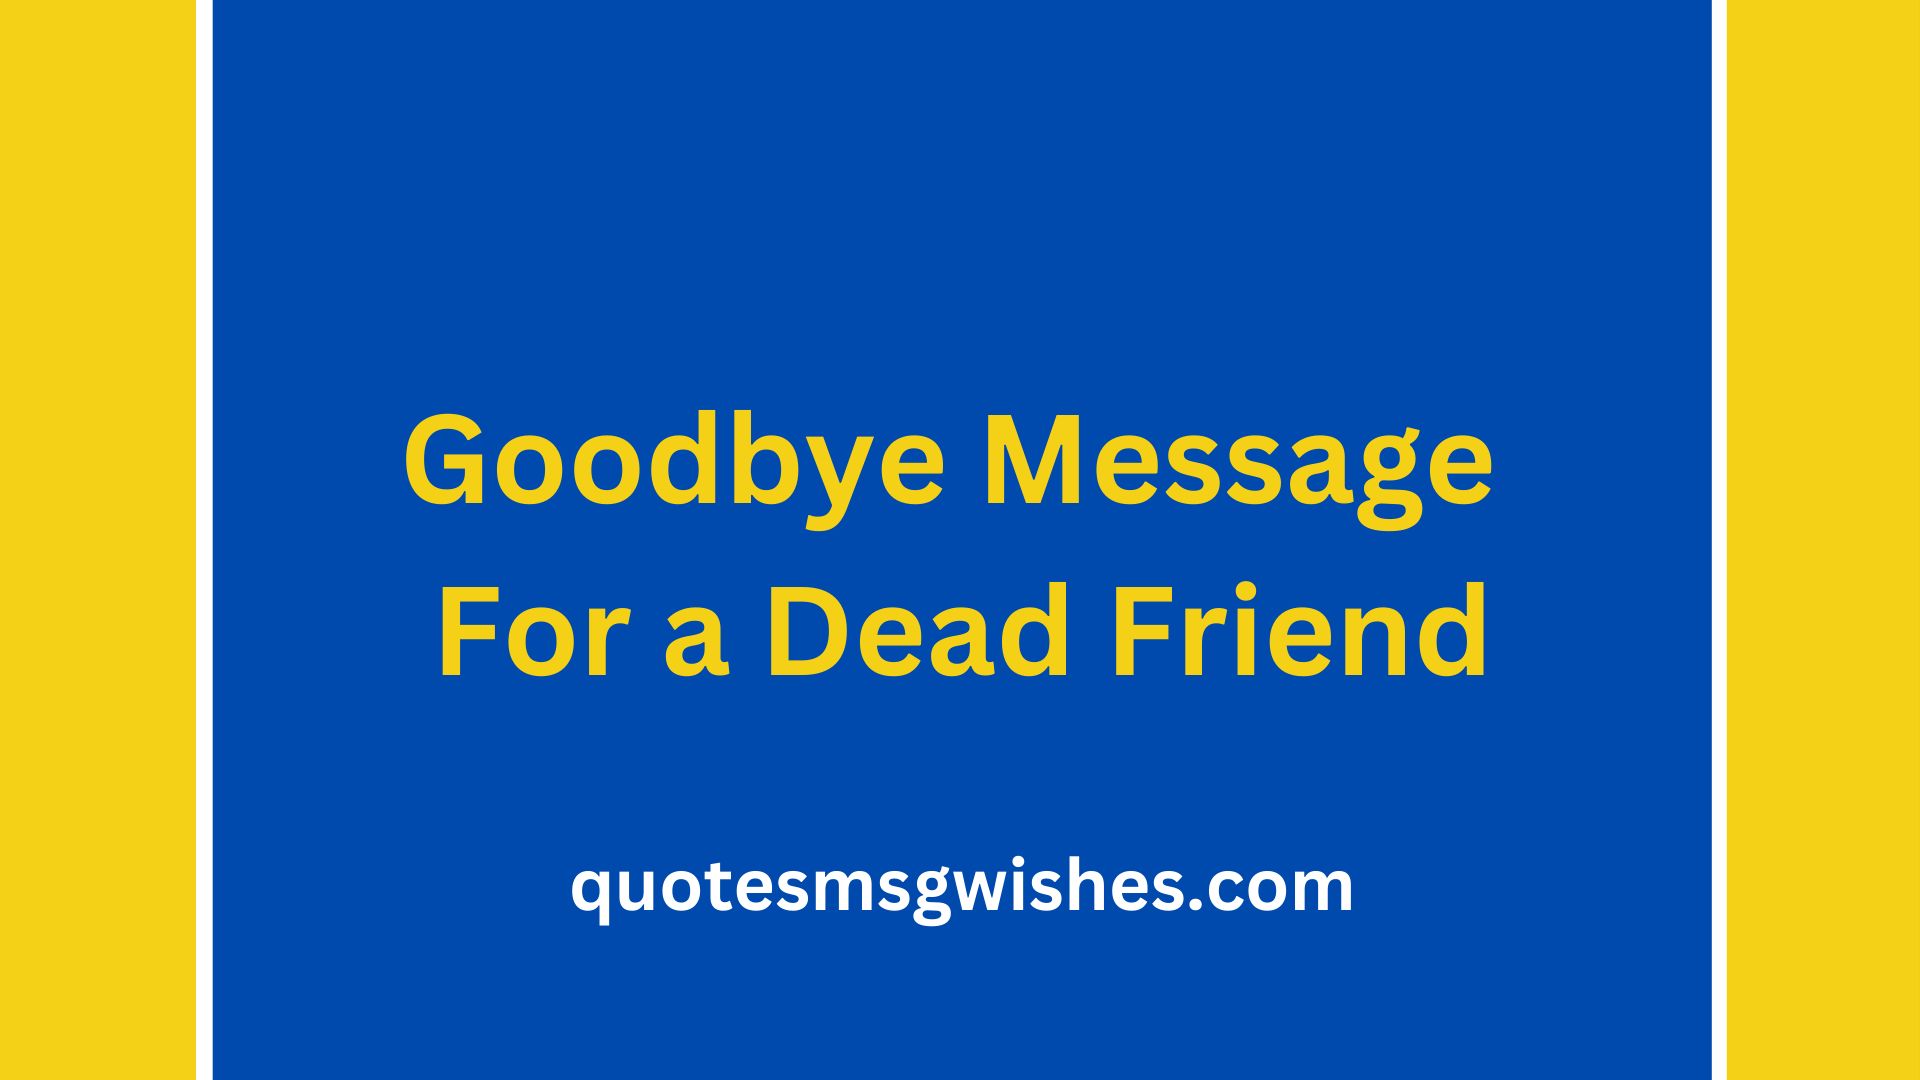 Goodbye Message For a Dead Friend